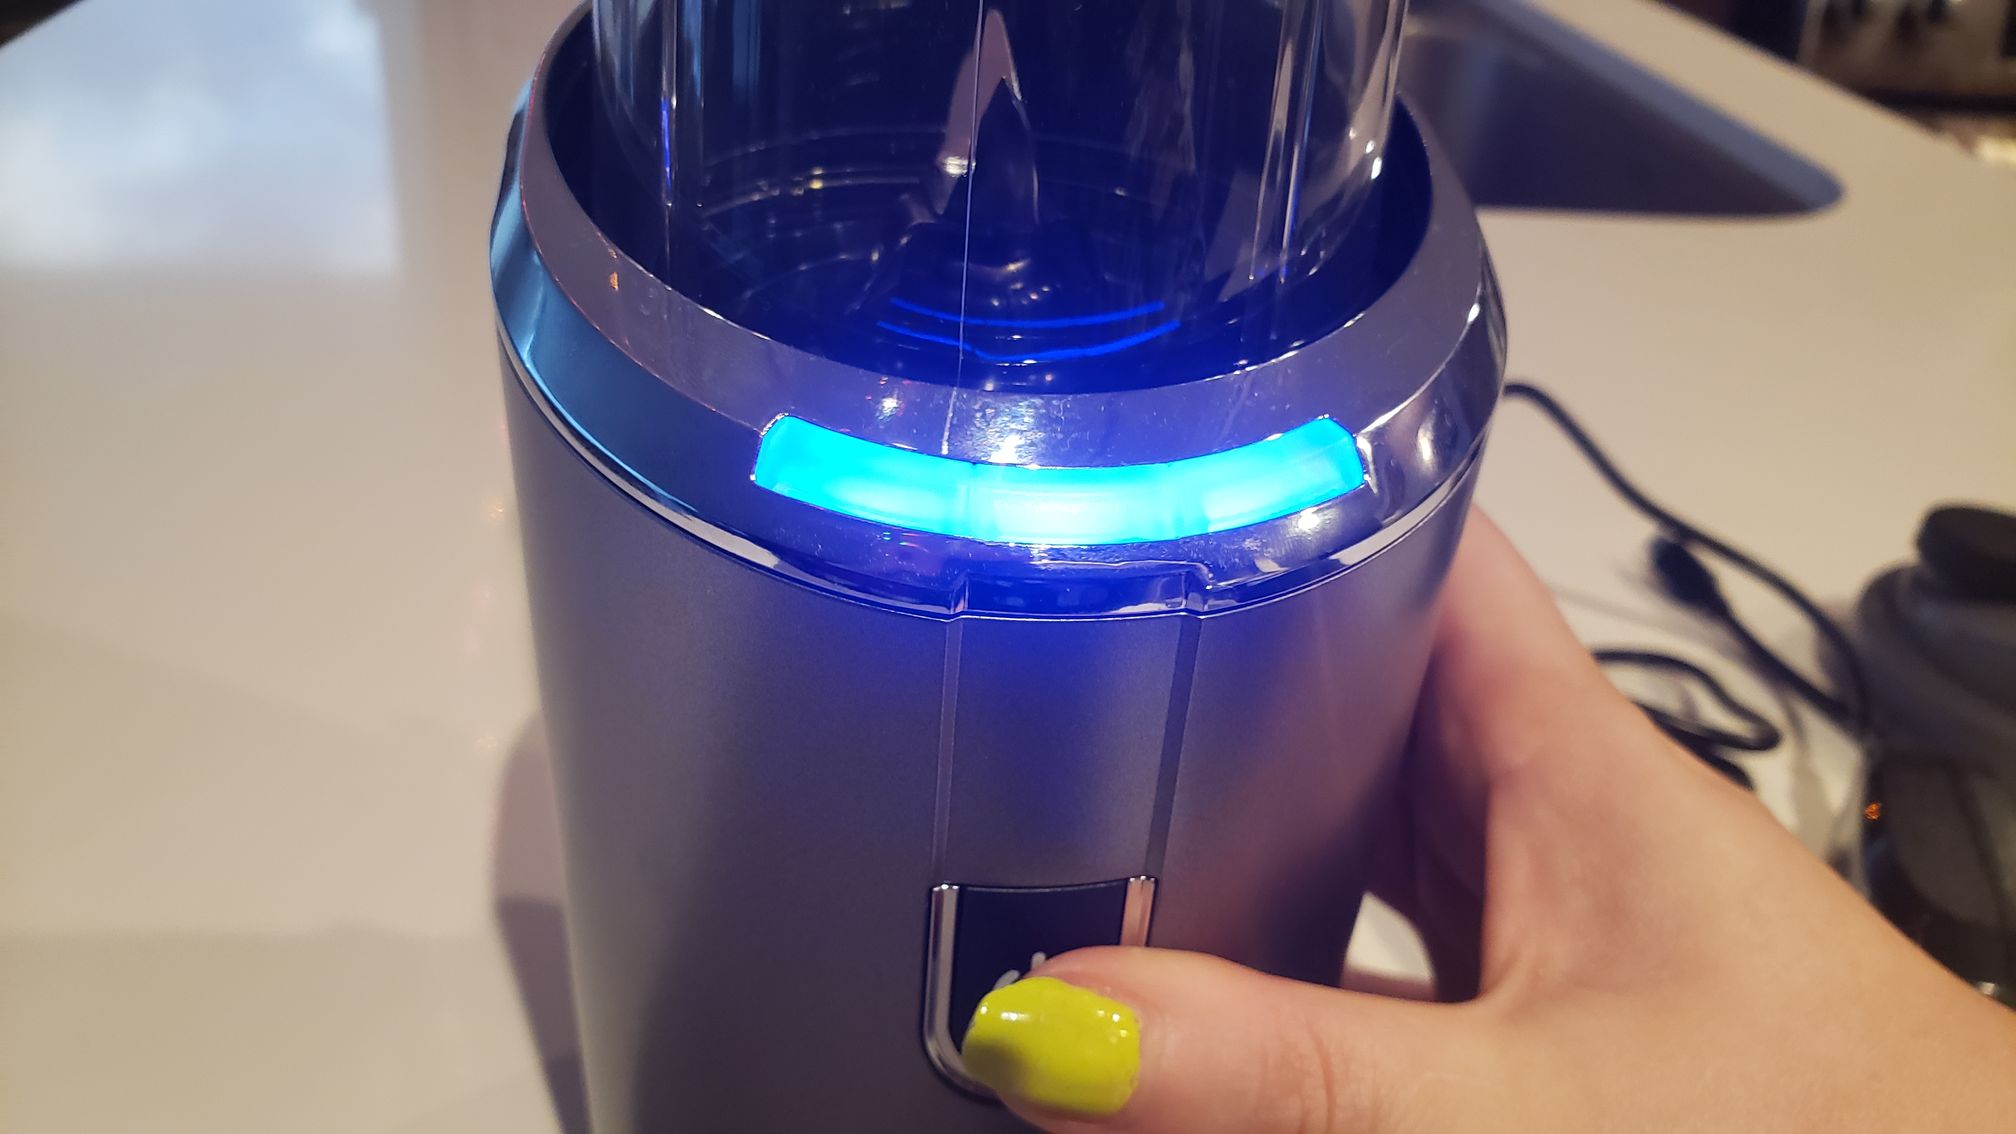 image of the blender's 3 LED all glowing, indicating full battery